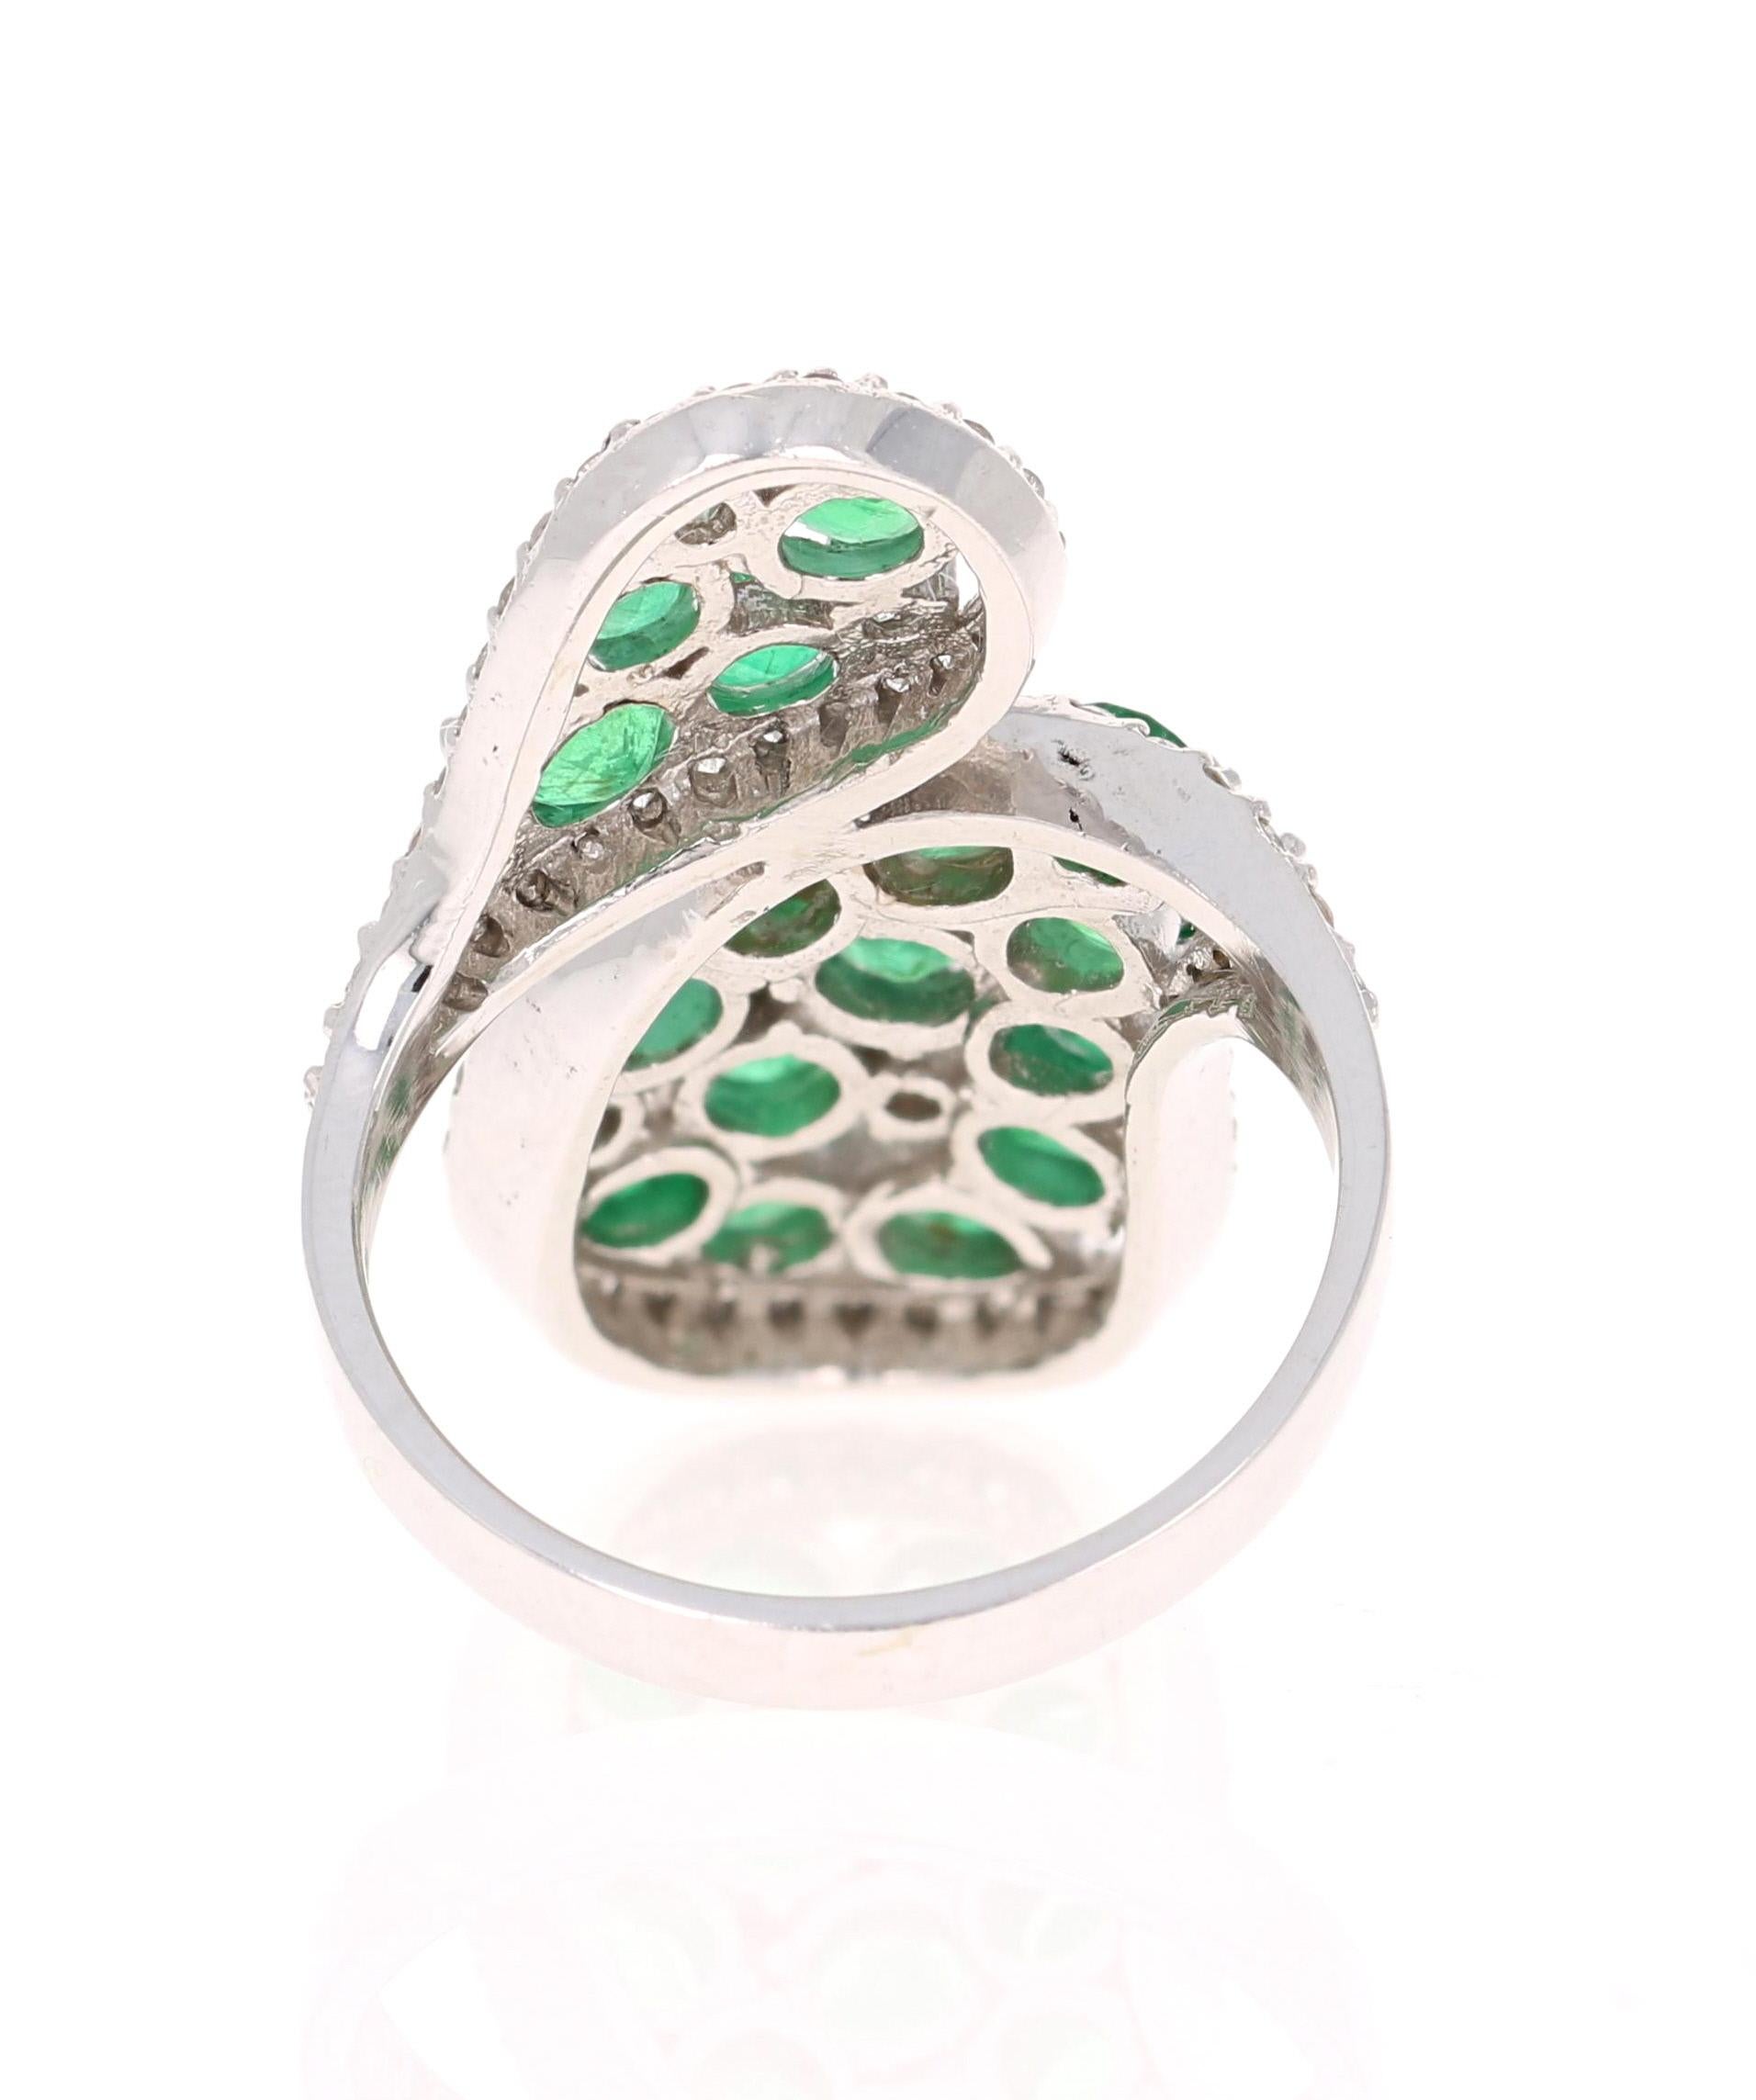 4.25 Carat Emerald and Diamond 14 Karat White Gold Cocktail Ring In New Condition For Sale In Los Angeles, CA